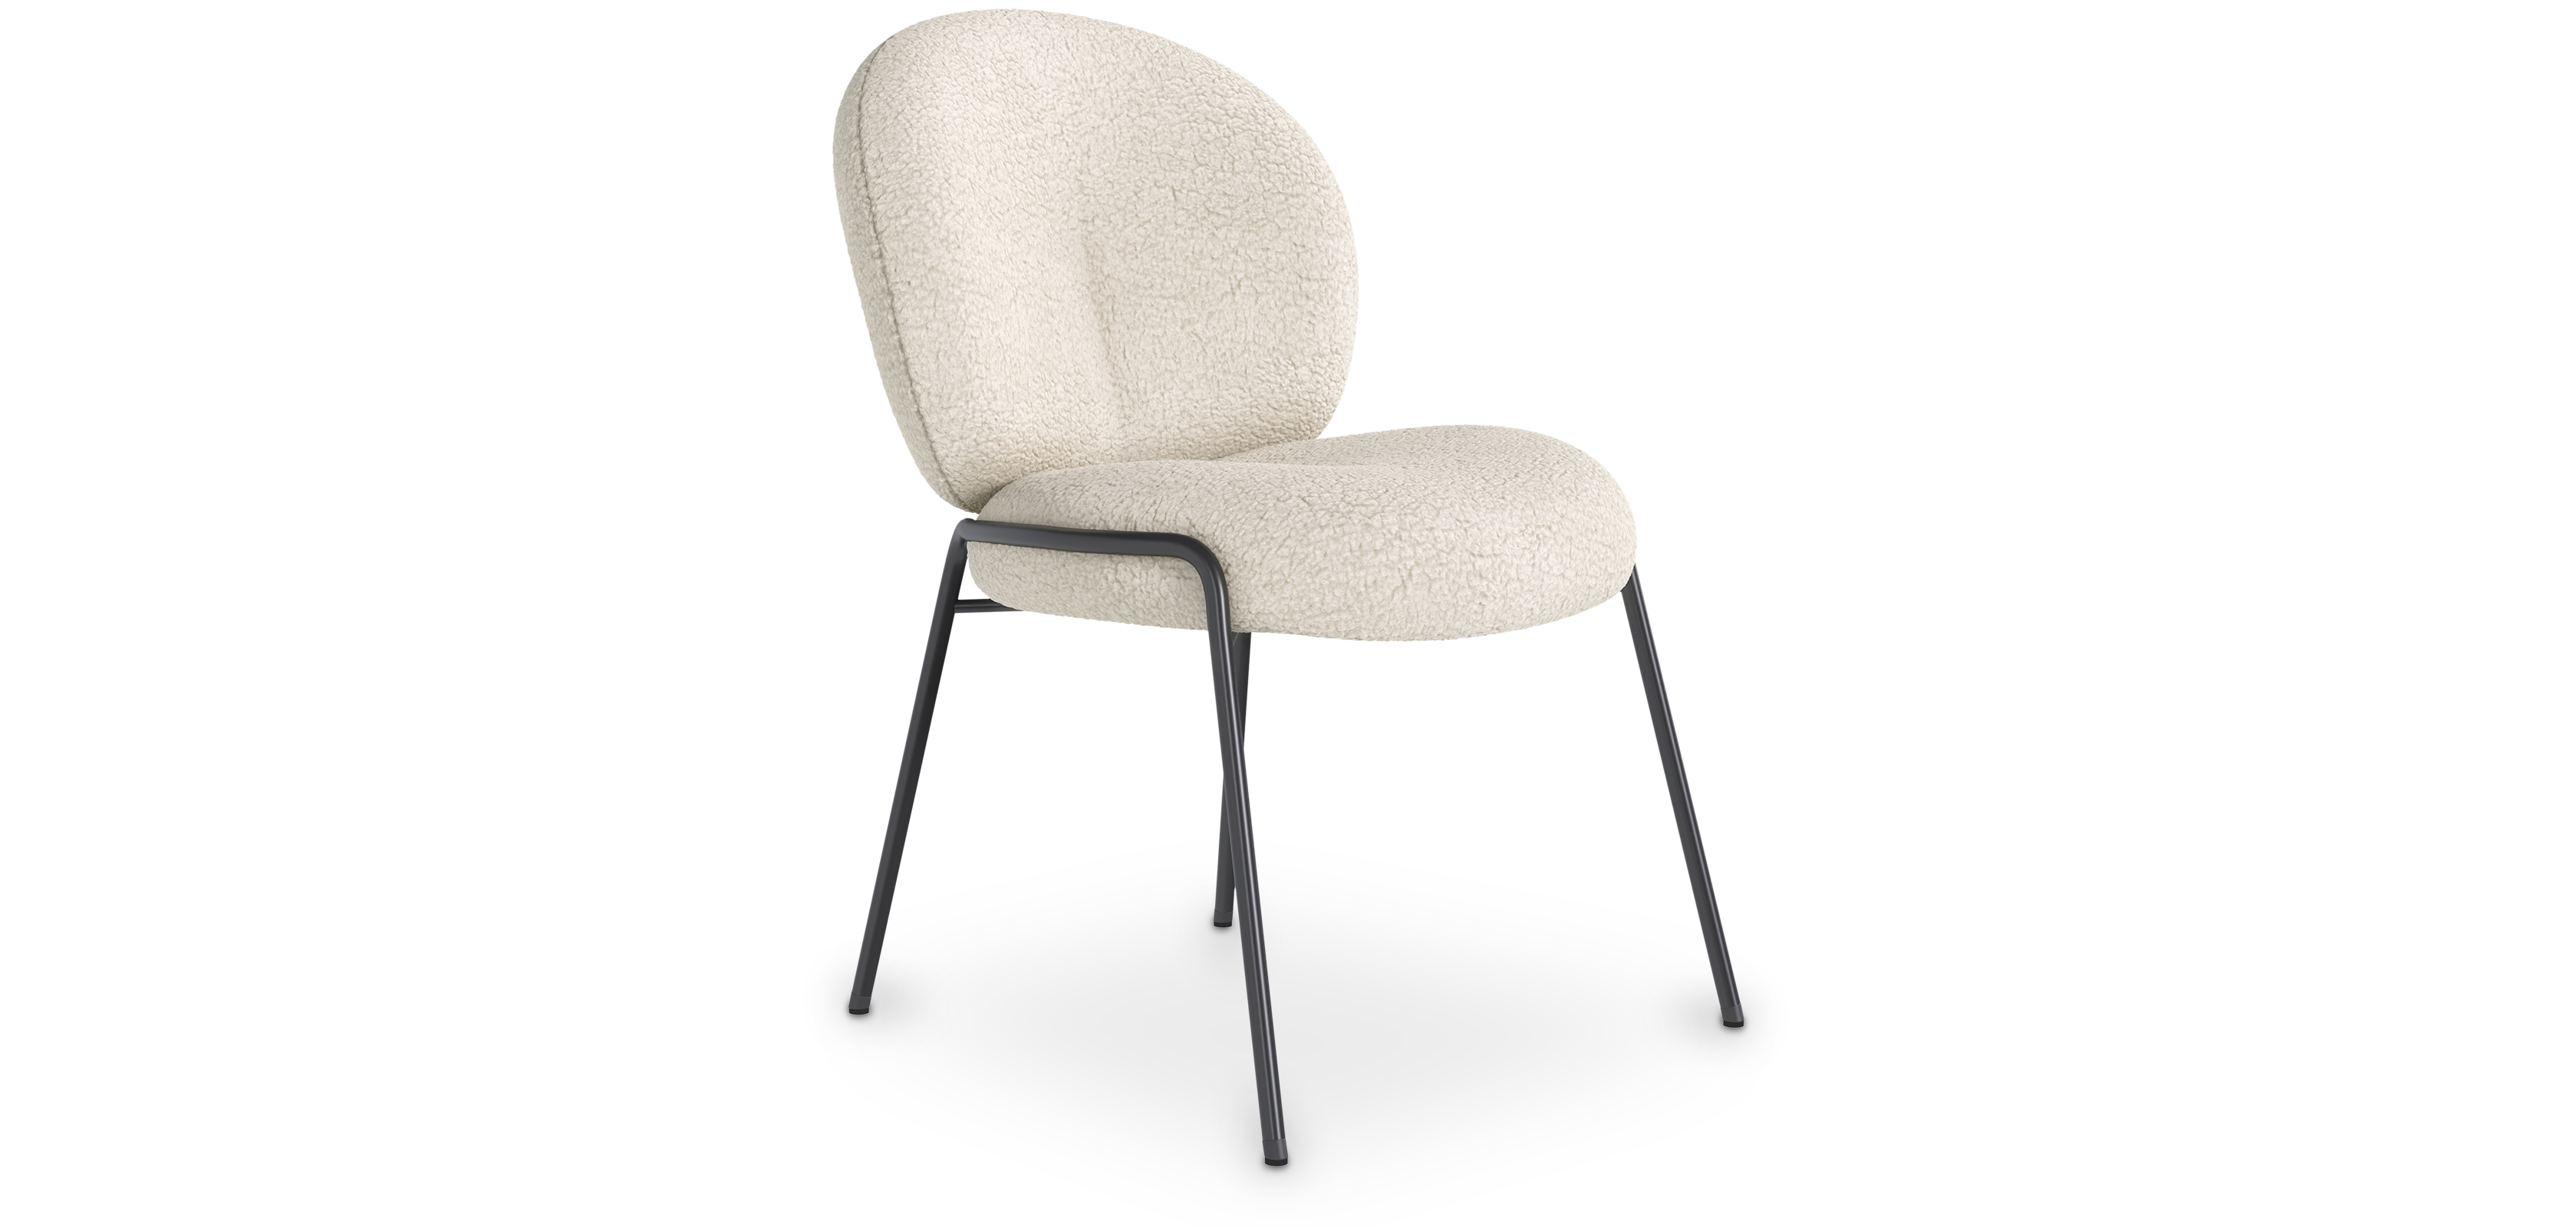 Dining Chair - Bouclé Fabric Upholstery - Toler